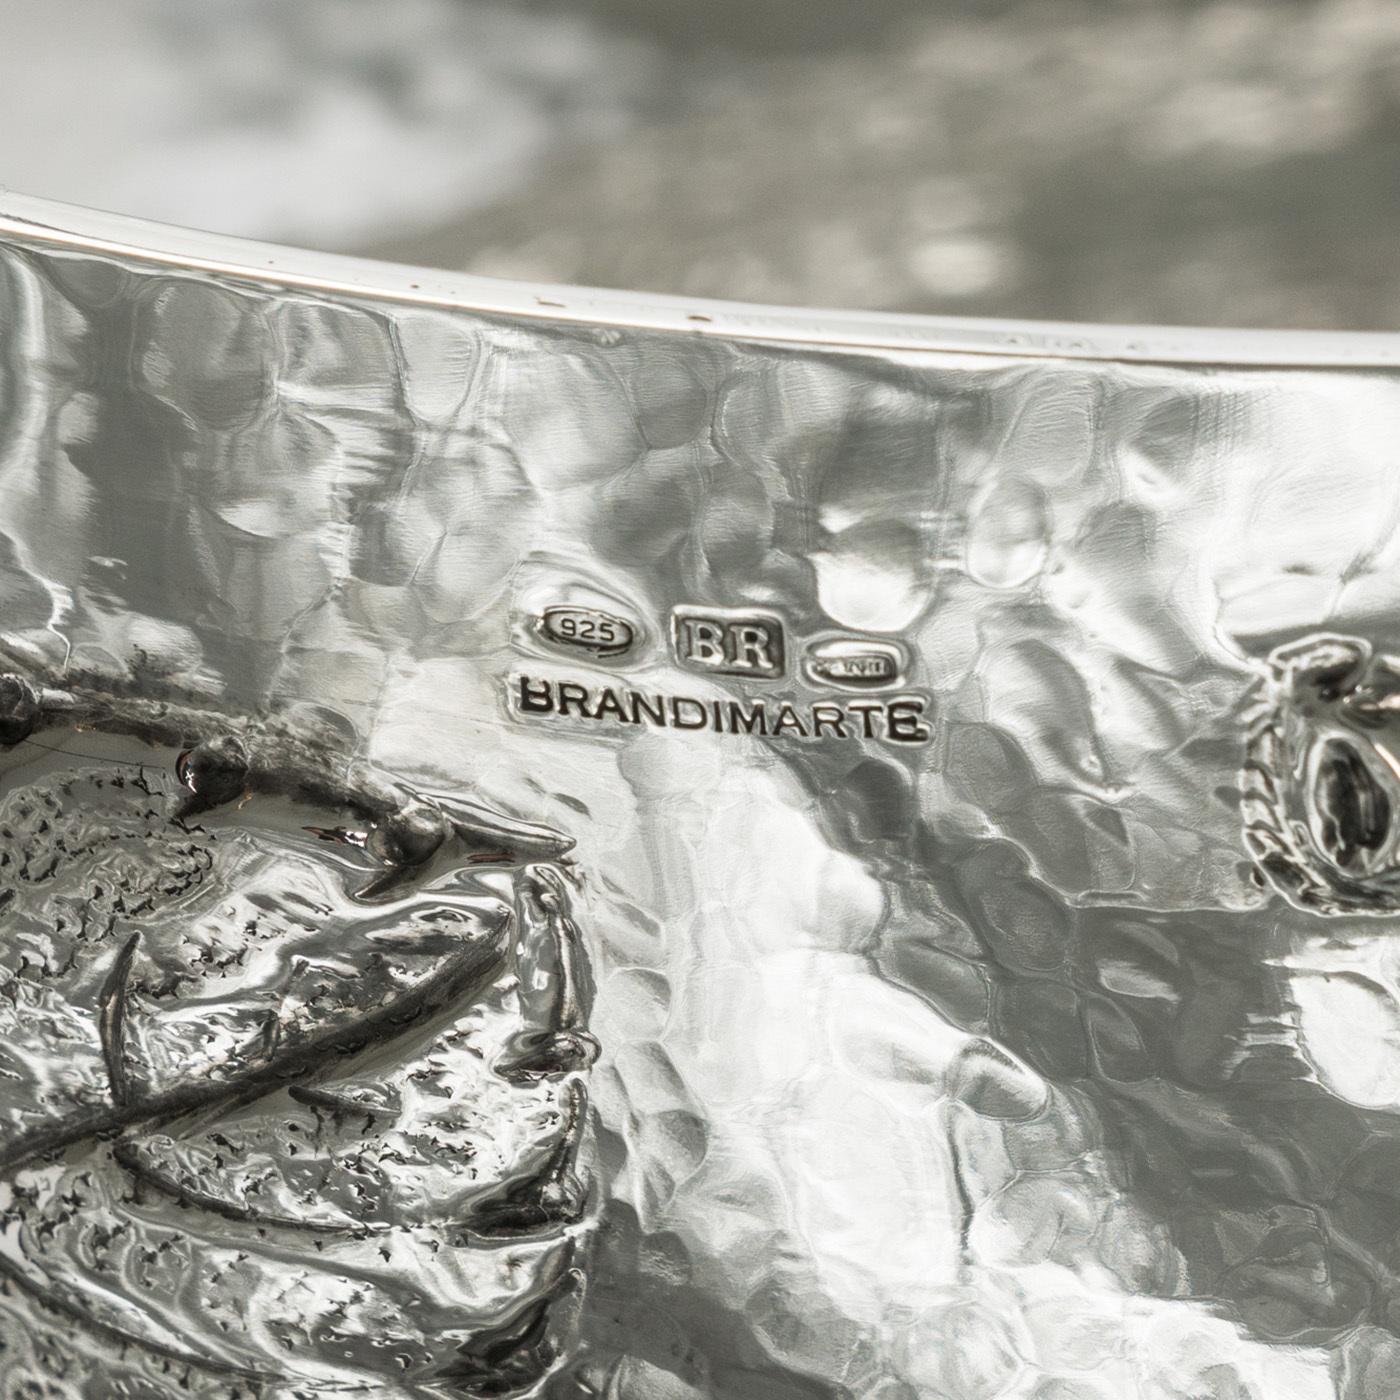 Cesello, the ancient art of precious metal engraving, has always been the pride of the Brandimarte brand which, due to the expert hands of the master craftsmen and the careful attention to the customer's needs, creates unique and fully customizable